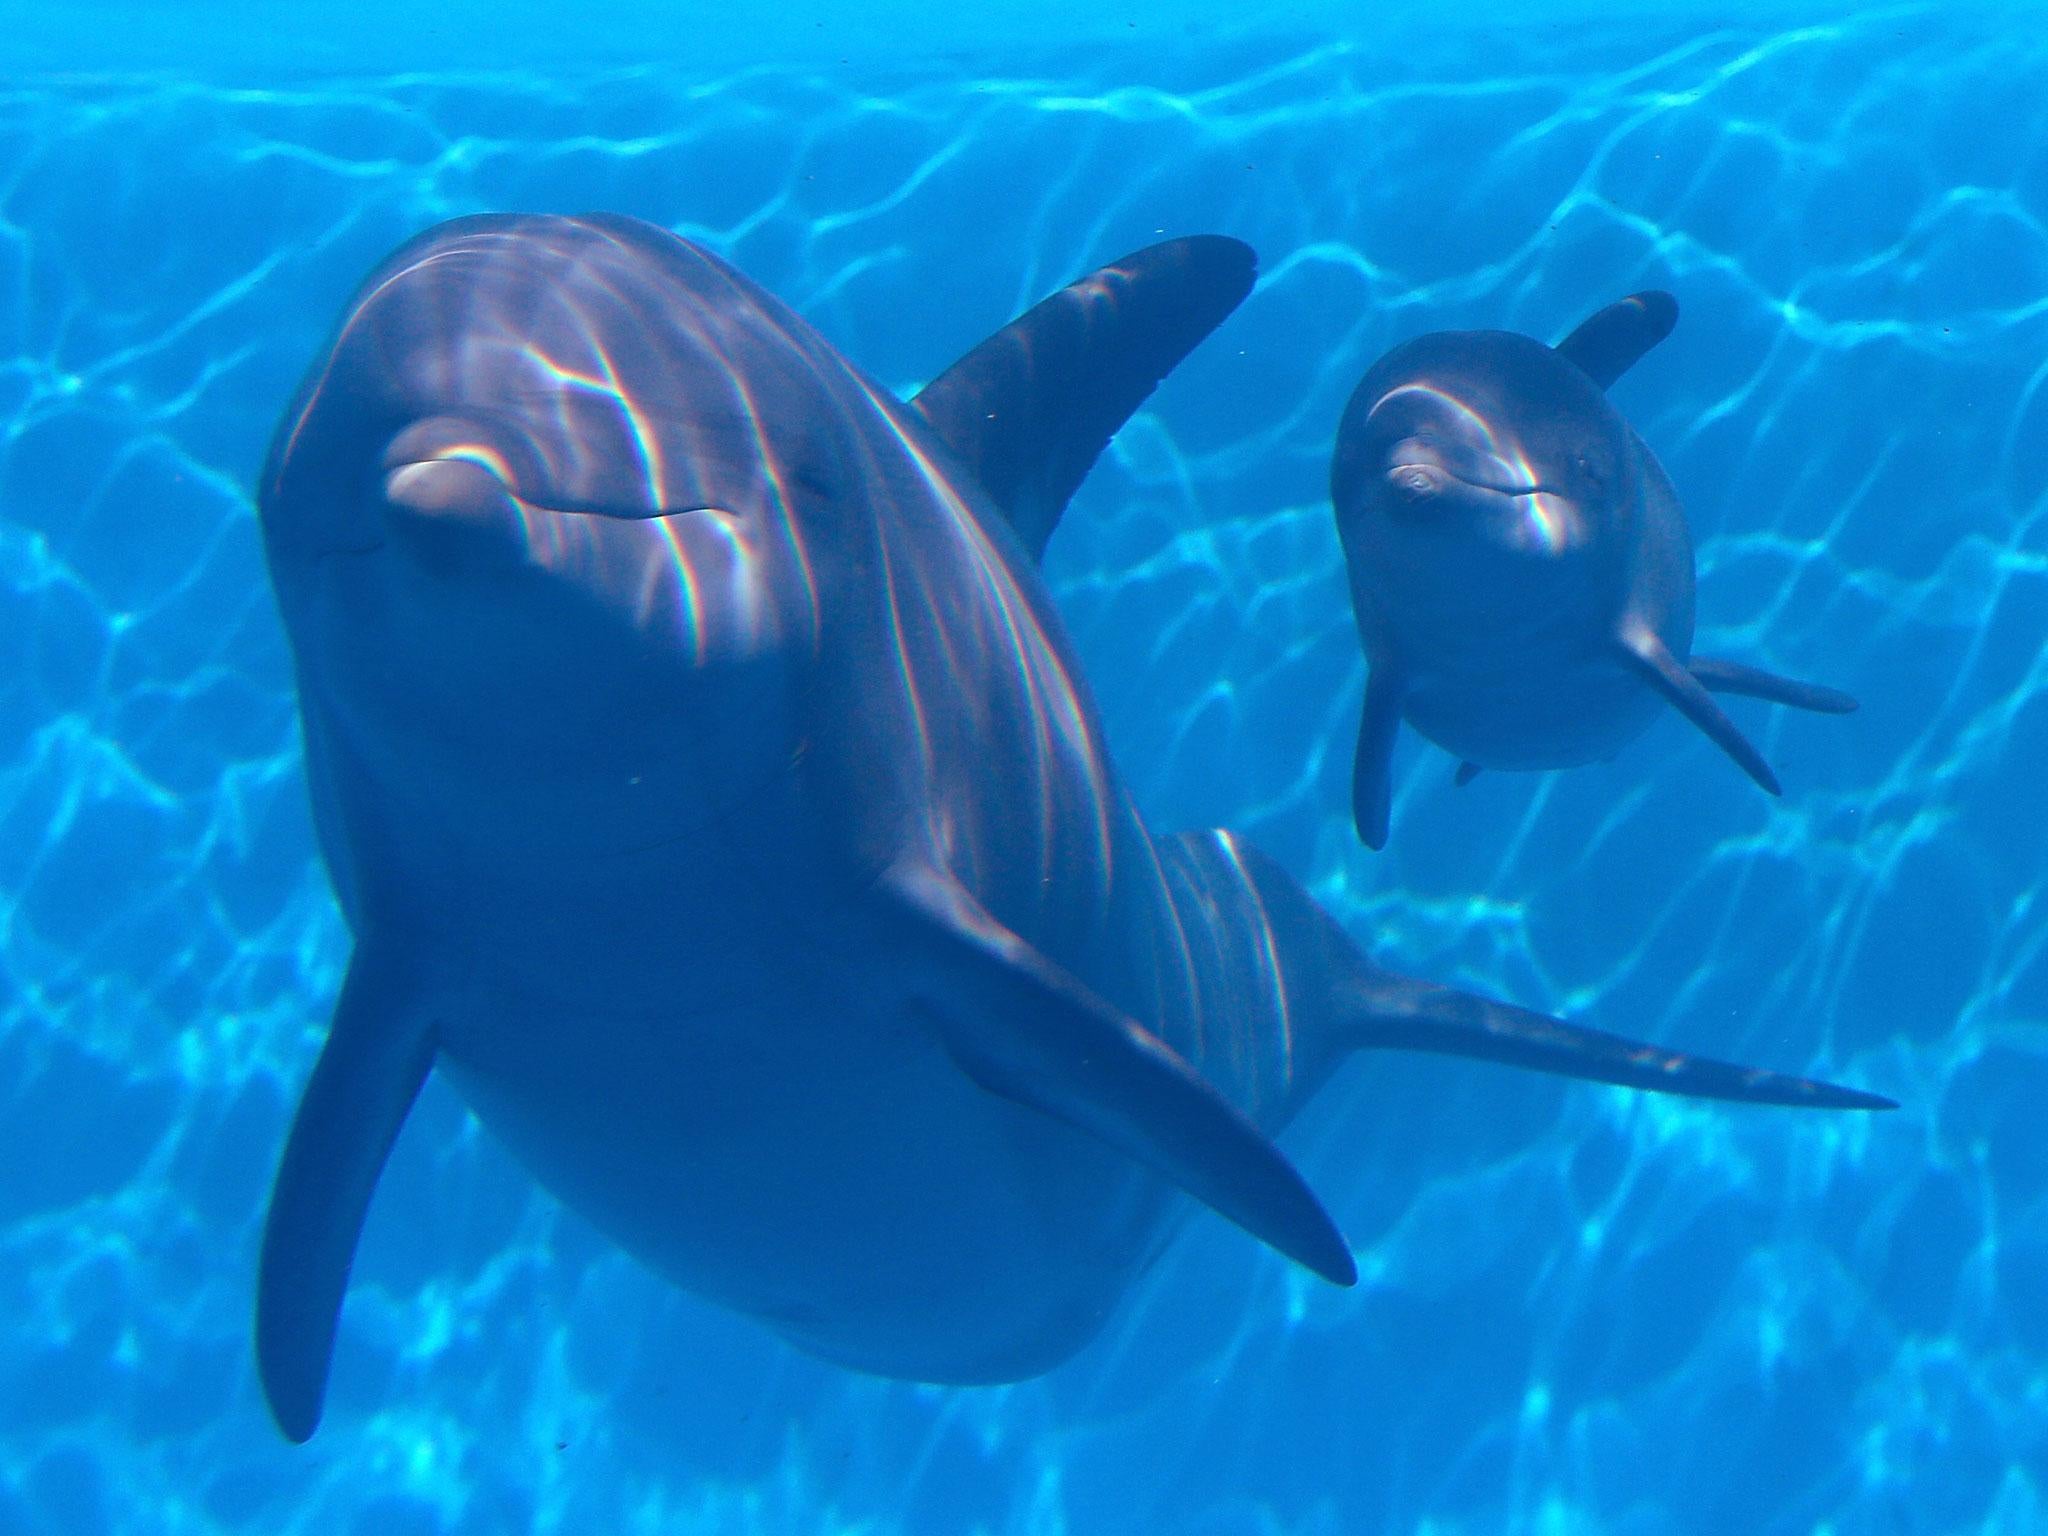 Bottlenose Dolphins, unrelated to the research, swims in a pool.